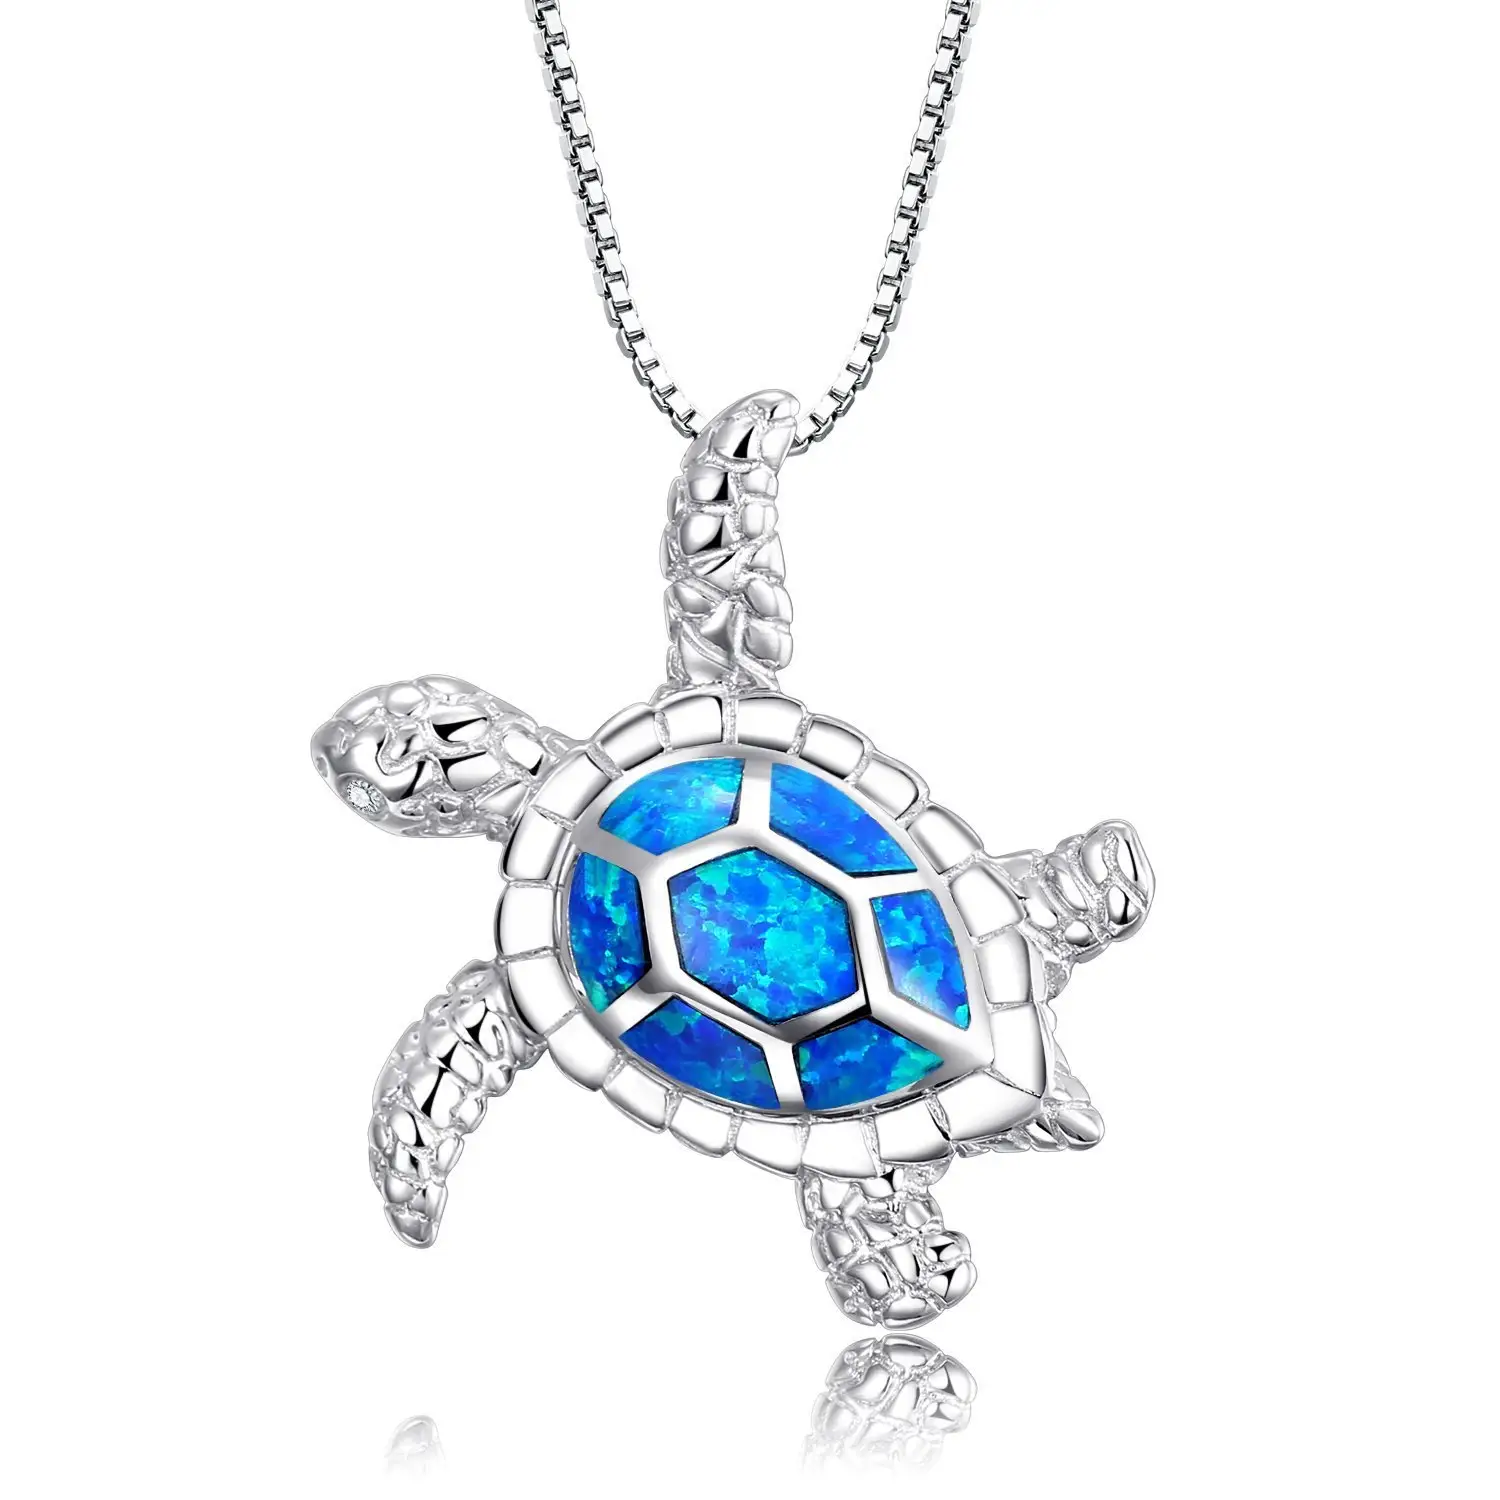 New fashion style blue opal turtle necklace for memory gift